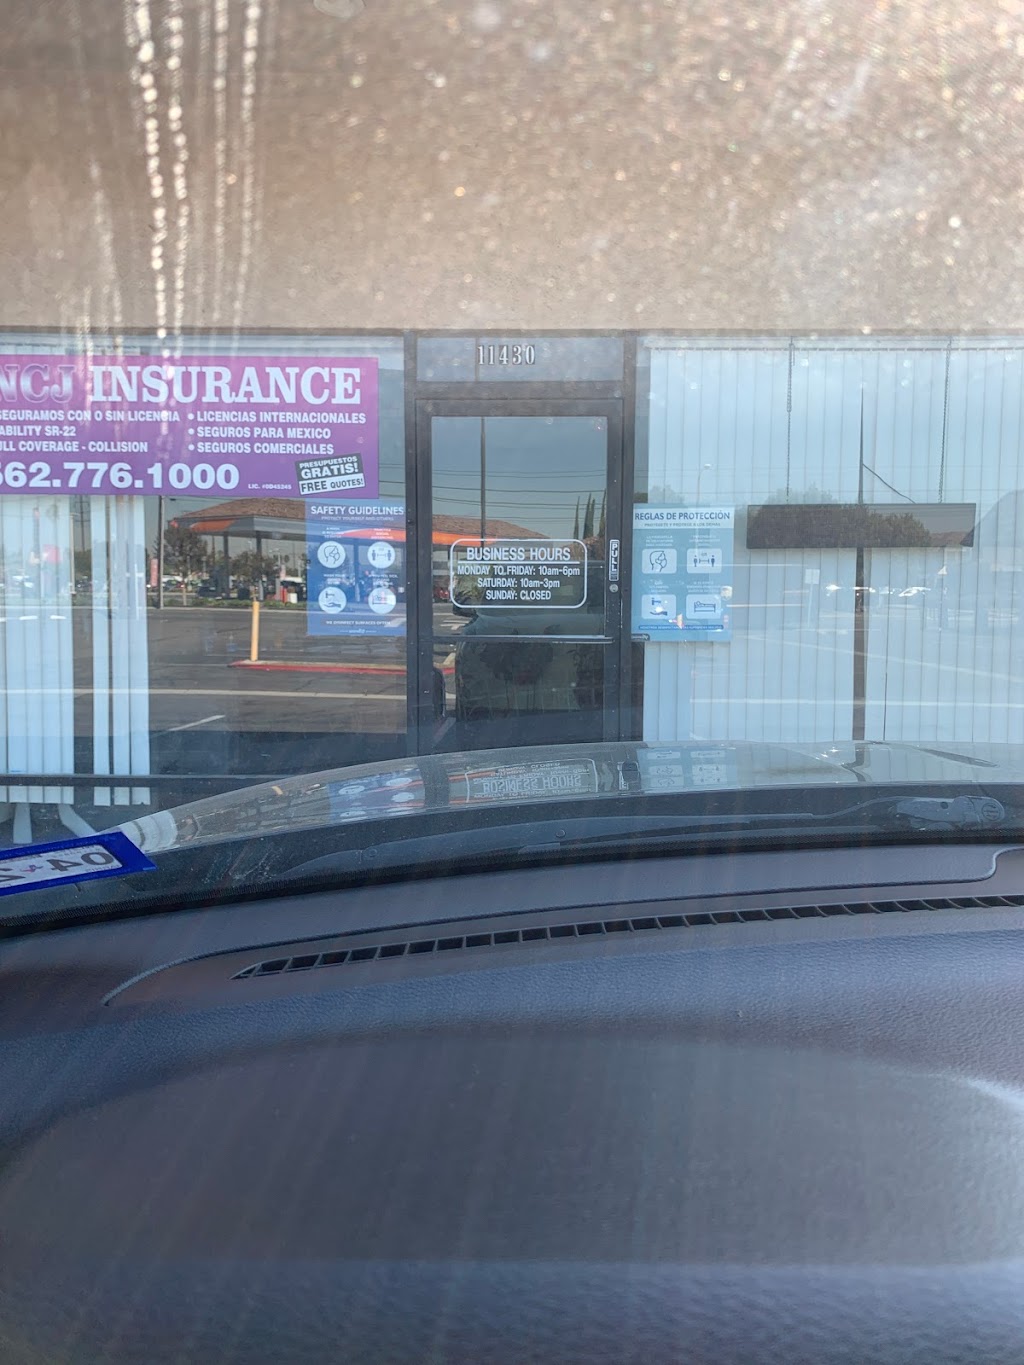 NCJ Insurance Services & Auto Registration | 11430 Old River School Rd, Downey, CA 90241, USA | Phone: (562) 776-1000